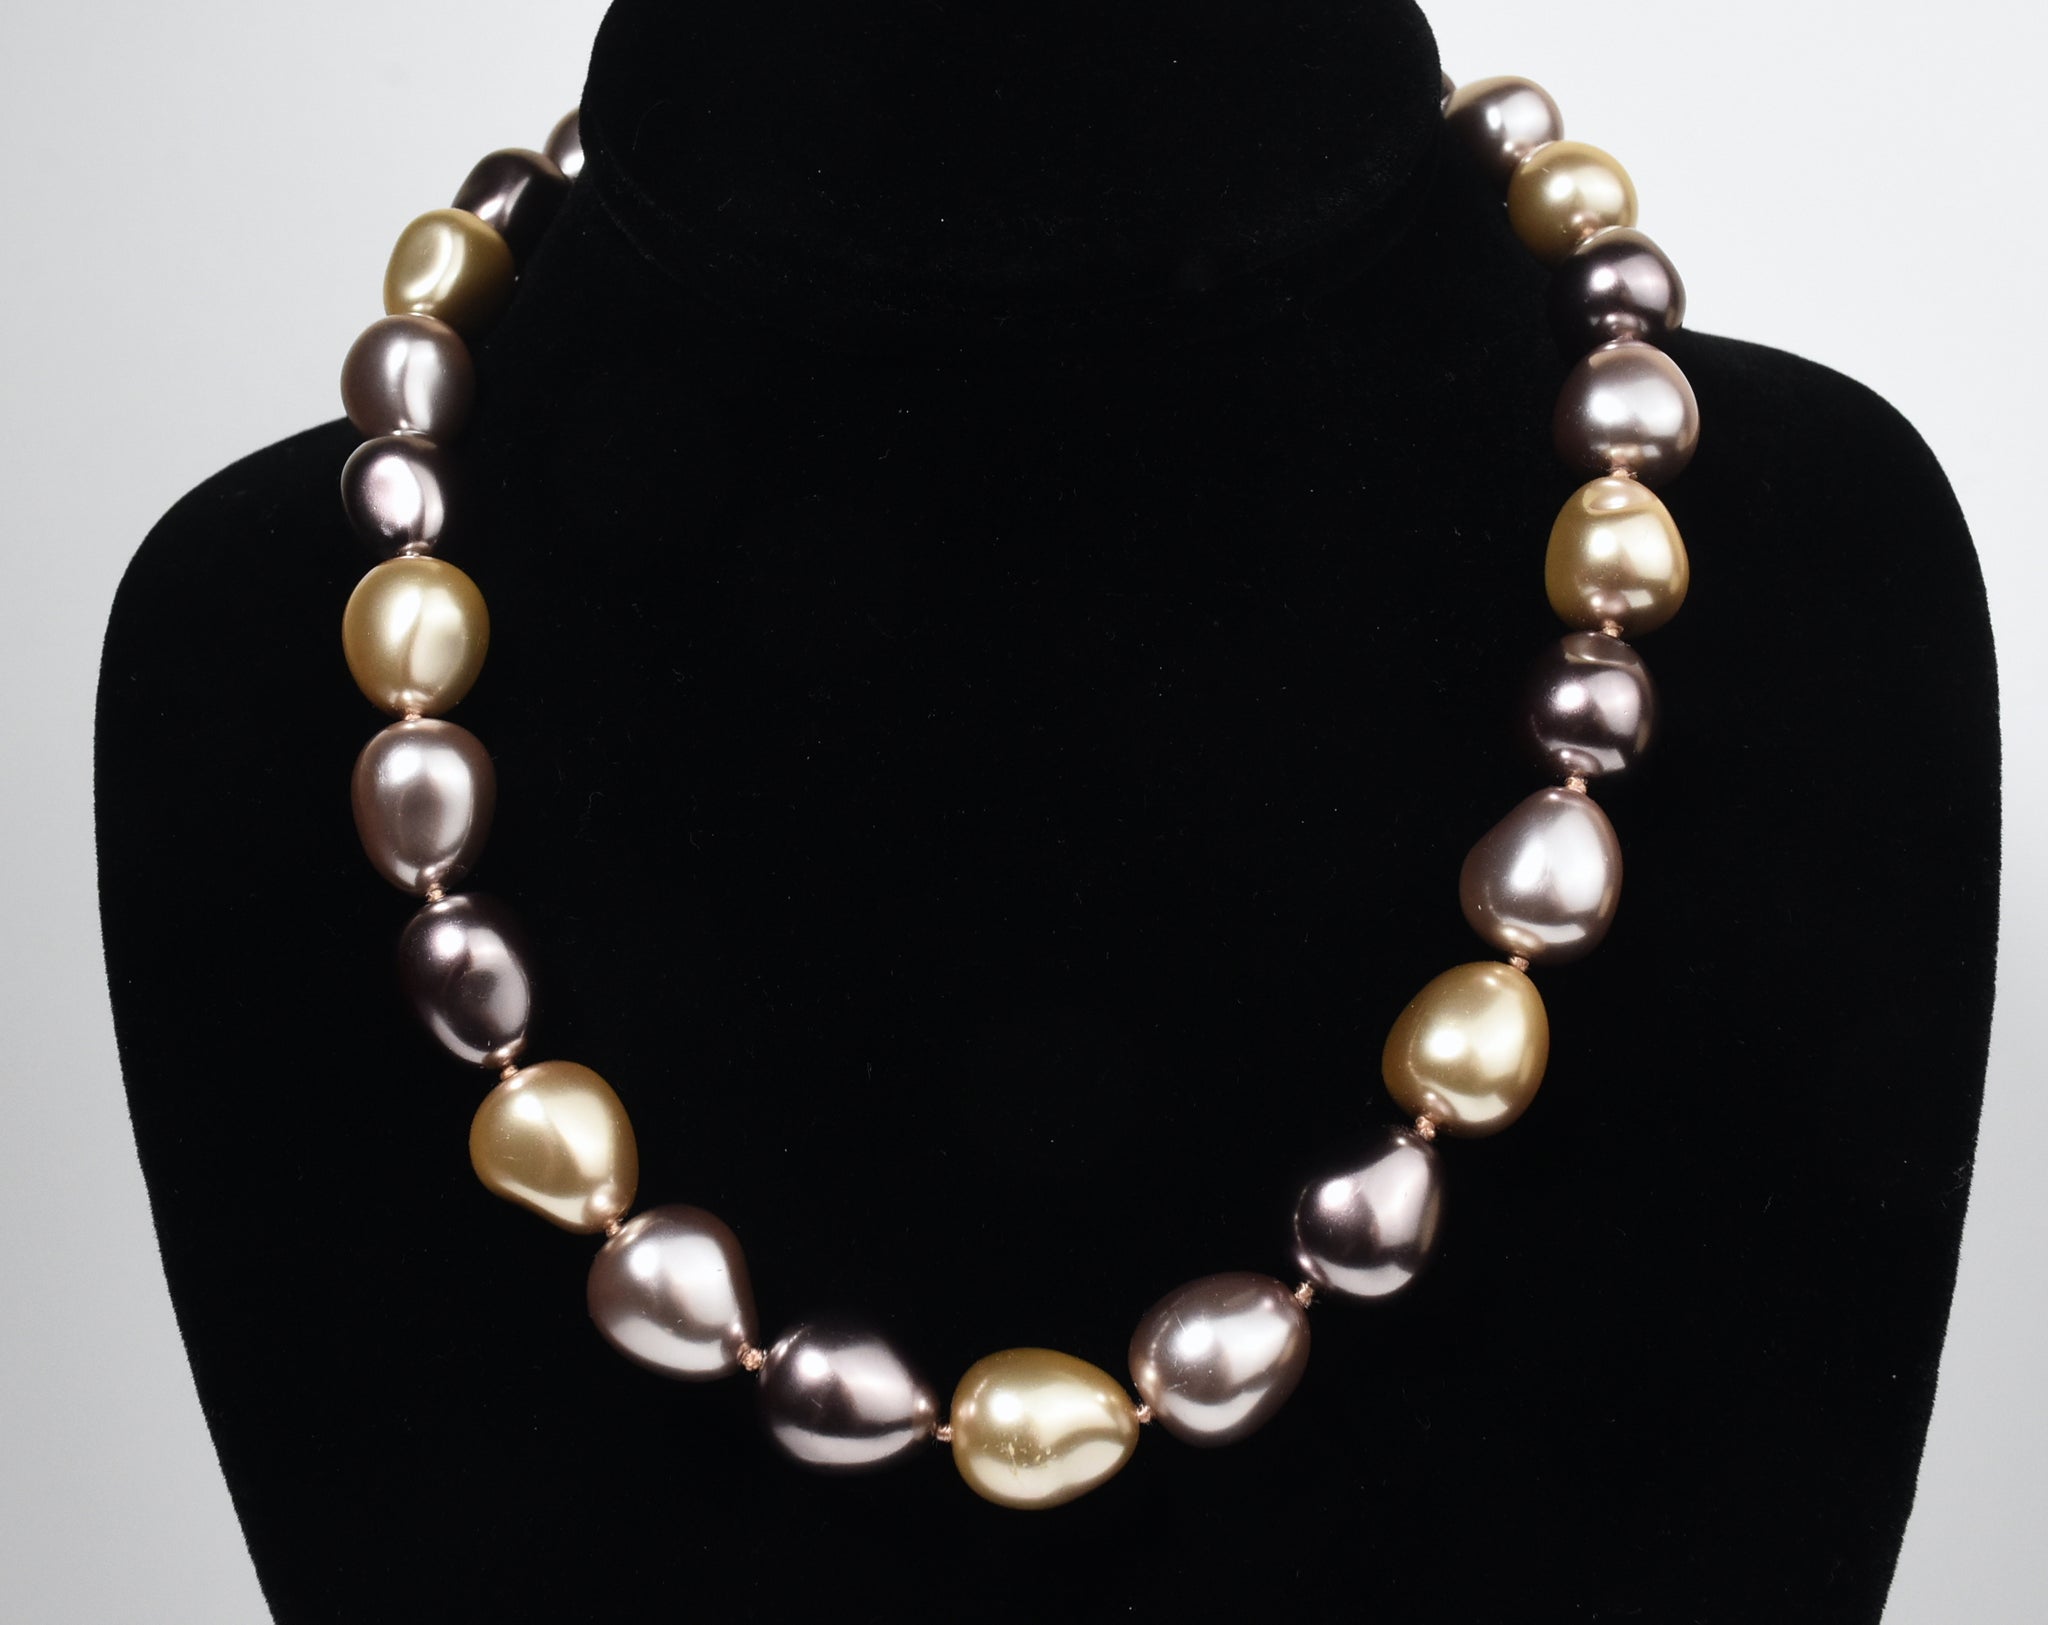 Brown Tone Faux Pearls Necklace - 18"